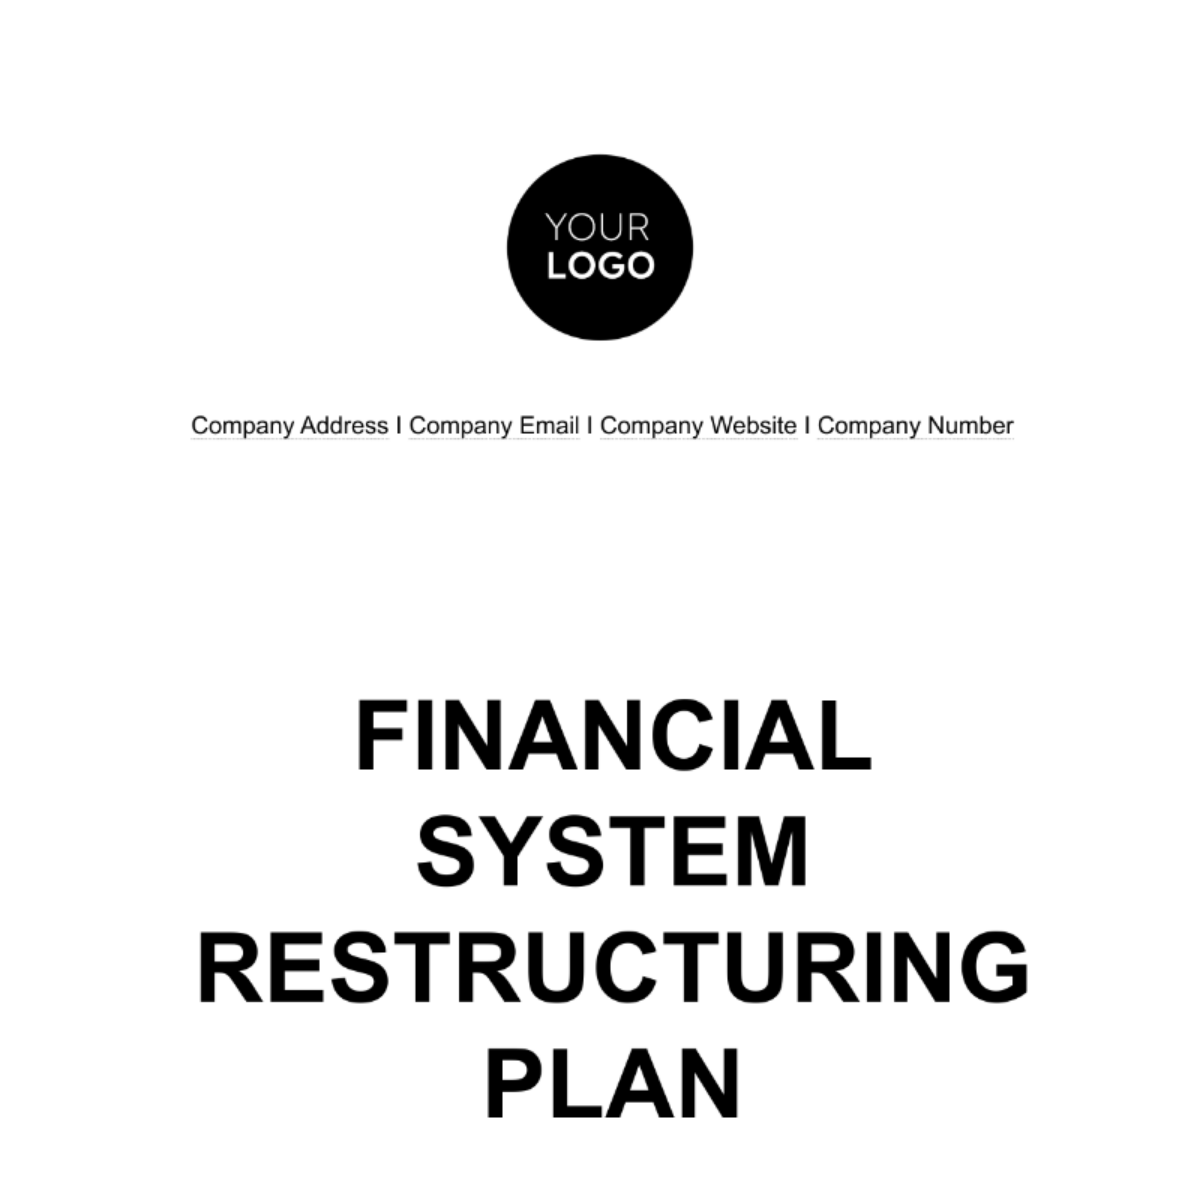 Financial System Restructuring Plan Template